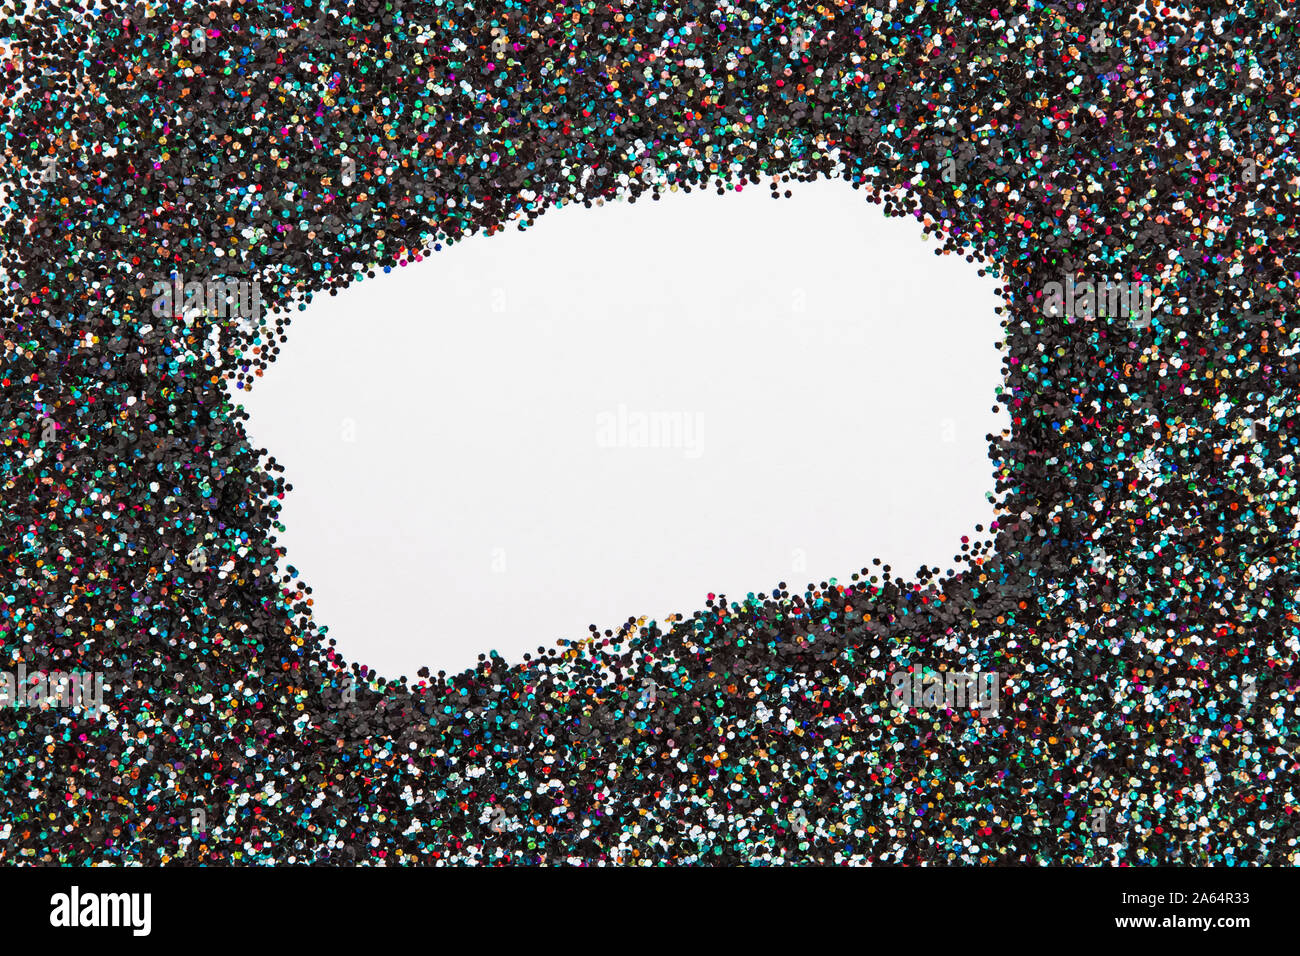 Holographic glitter on black background with empty blank space in the center. Stock Photo